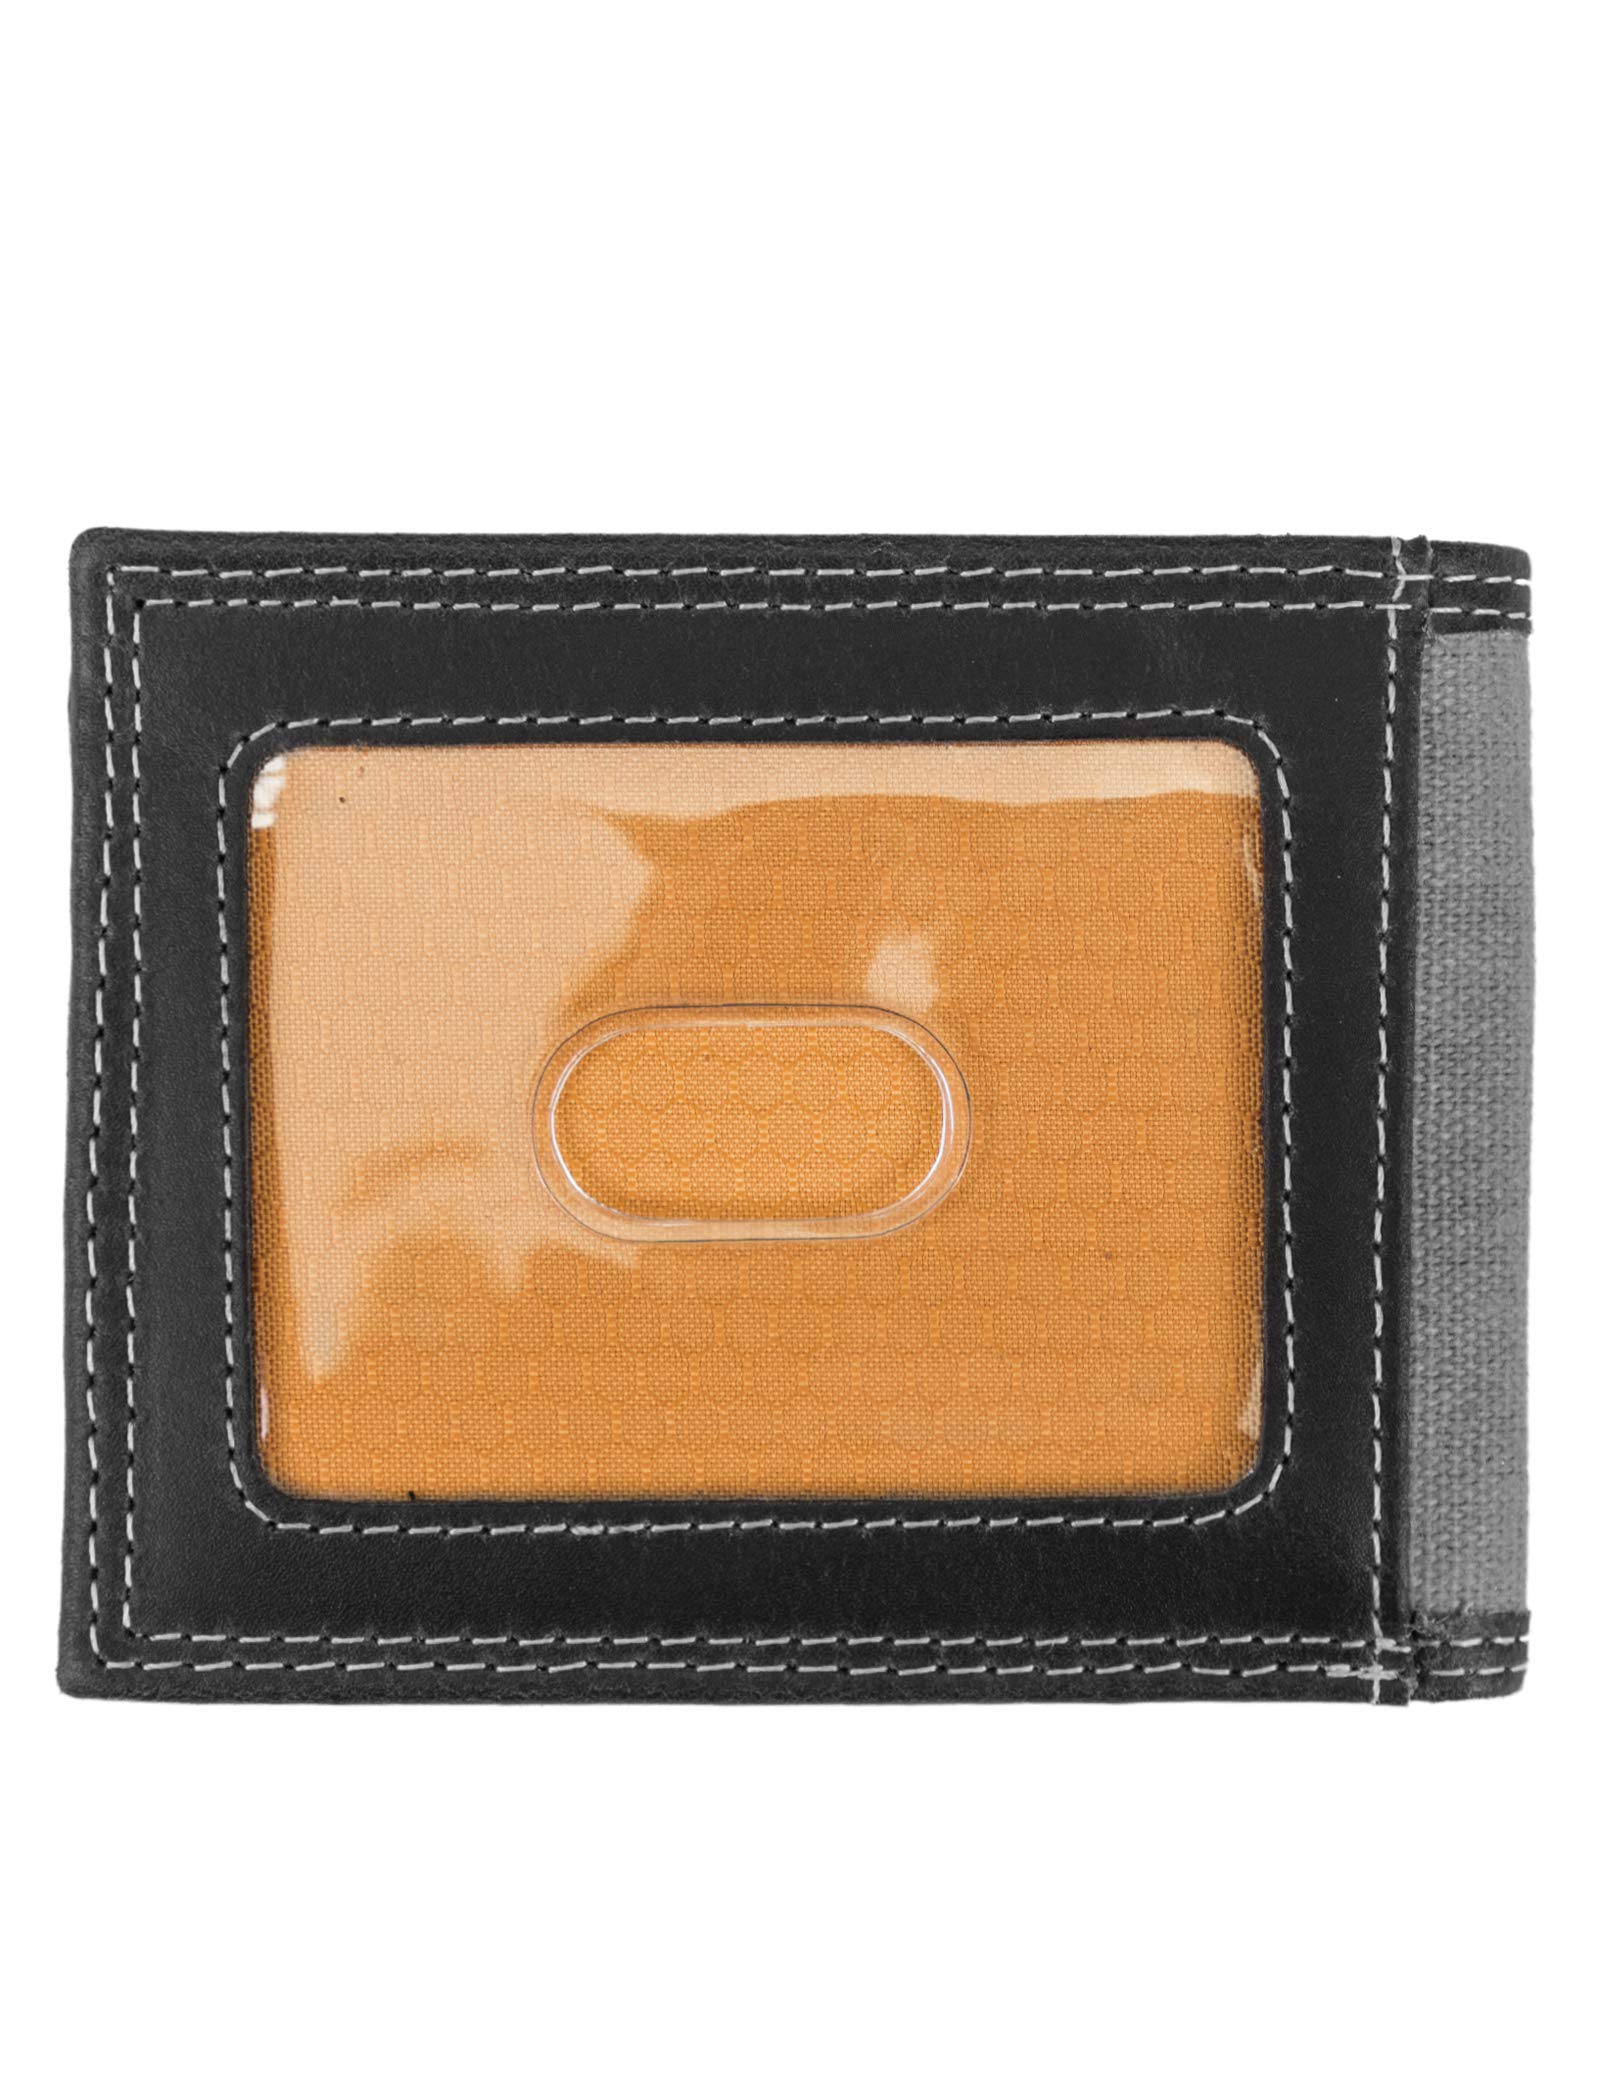 Timberland PRO Men's Canvas Leather RFID Billfold Wallet with Back Id Window